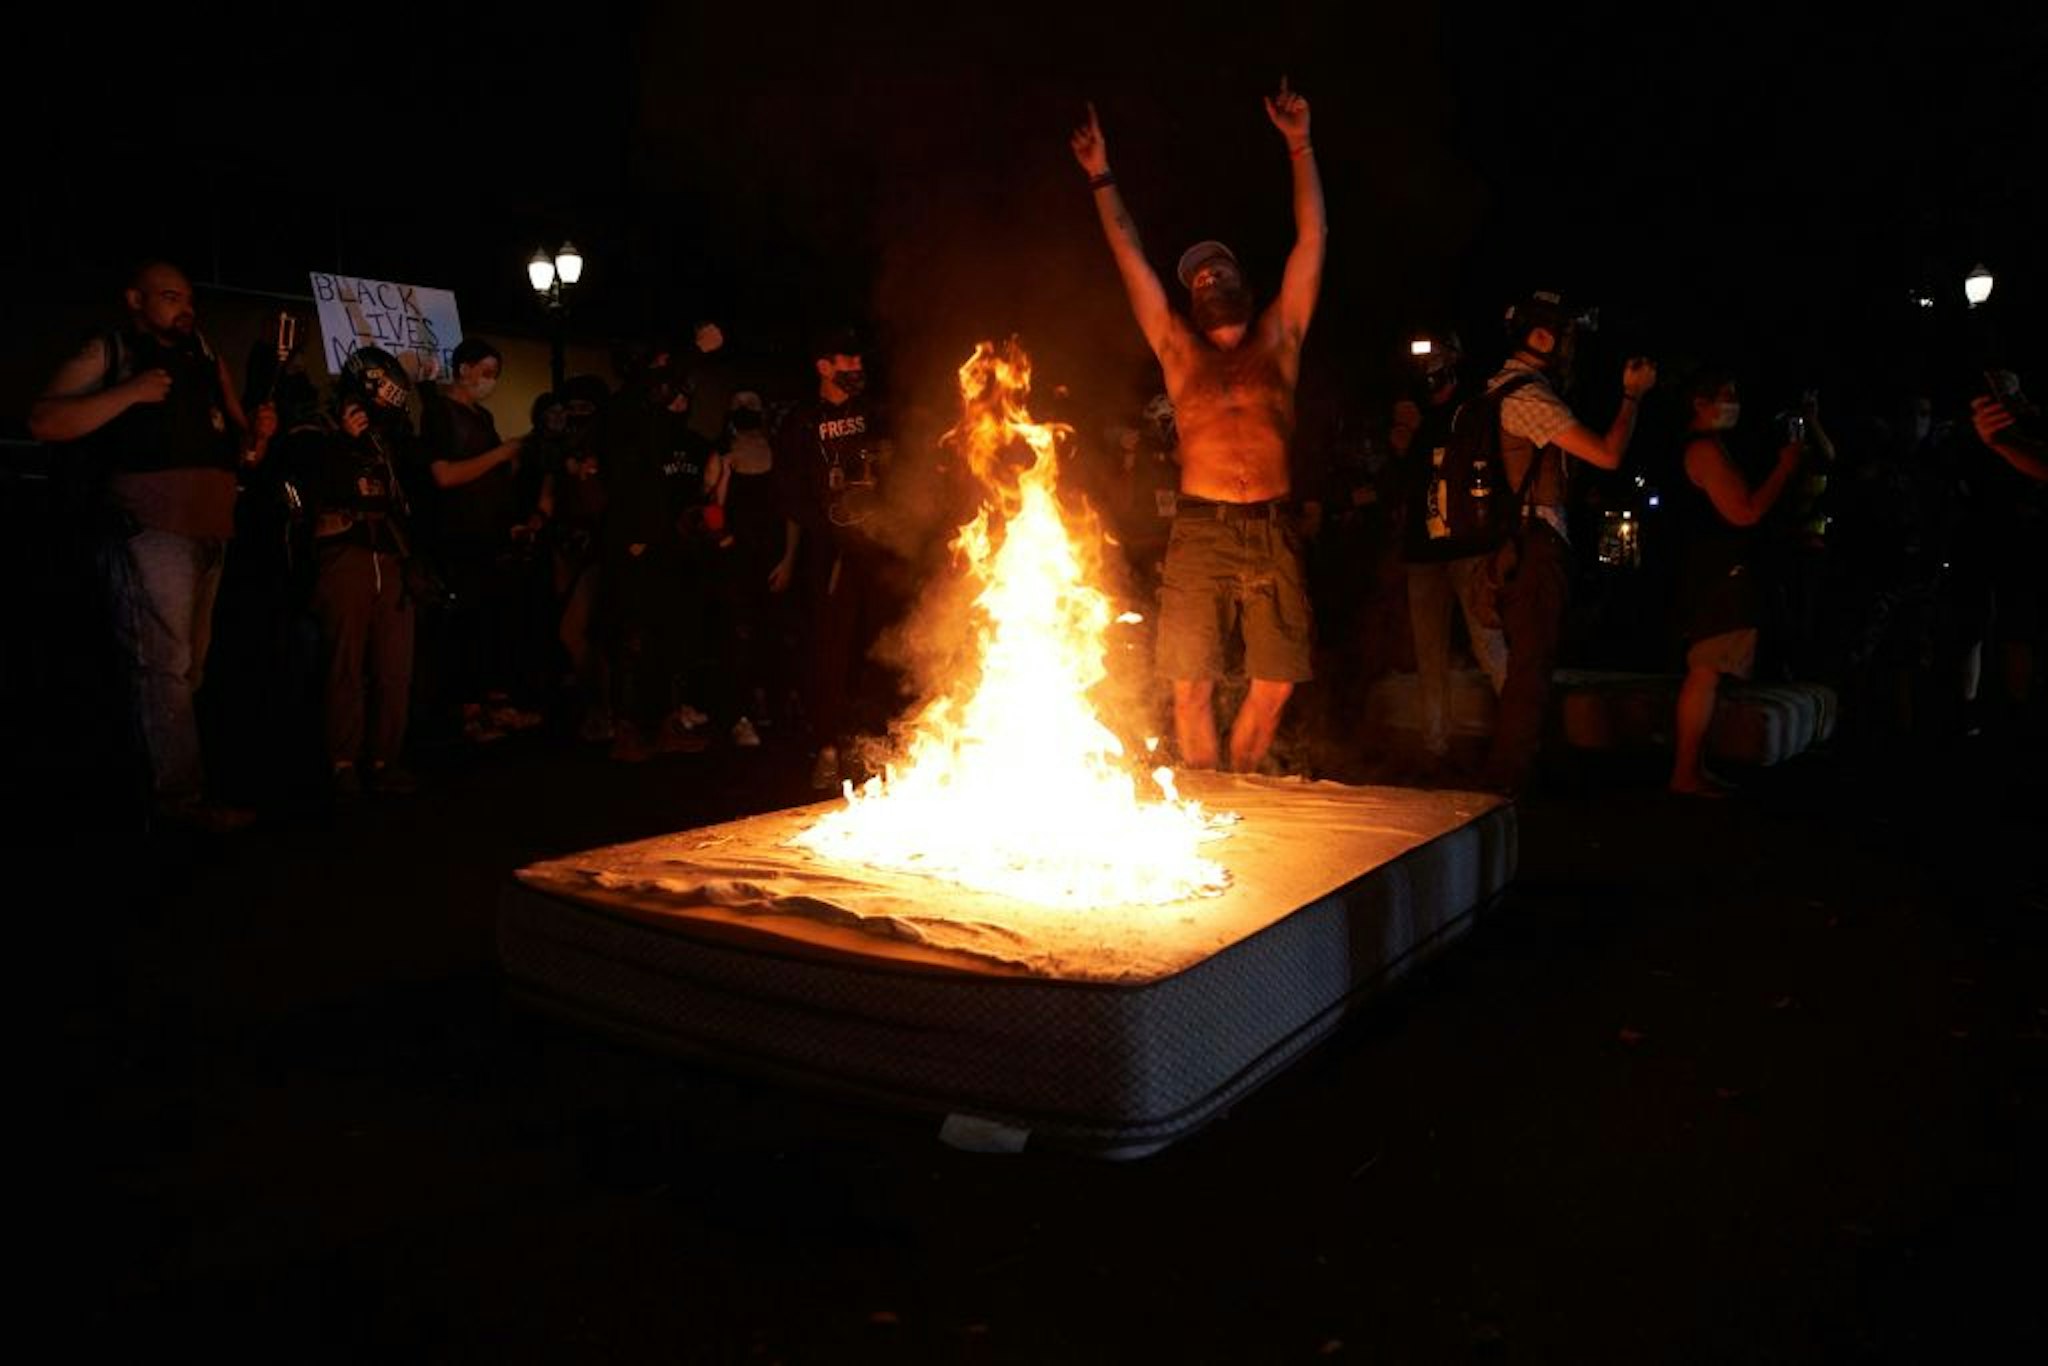 A protestor dances as mattresses are set on fire in front of the North Precinct Police building in Portland, Oregon on September 6, 2020.